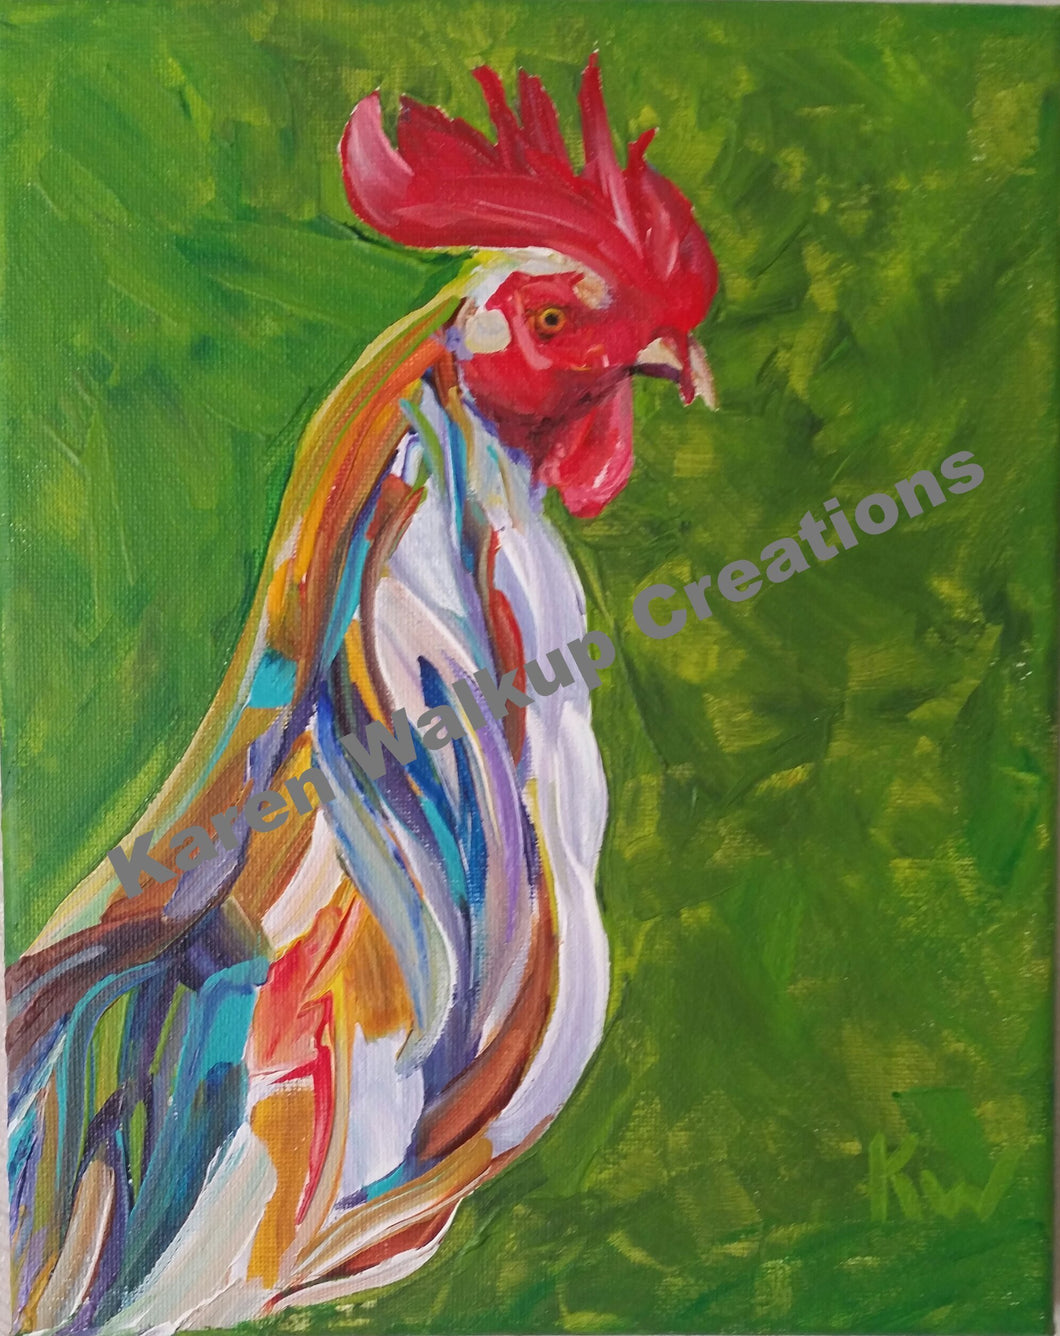 Animals, Rooster~801   *Fine art giclee print on archival watercolor paper.